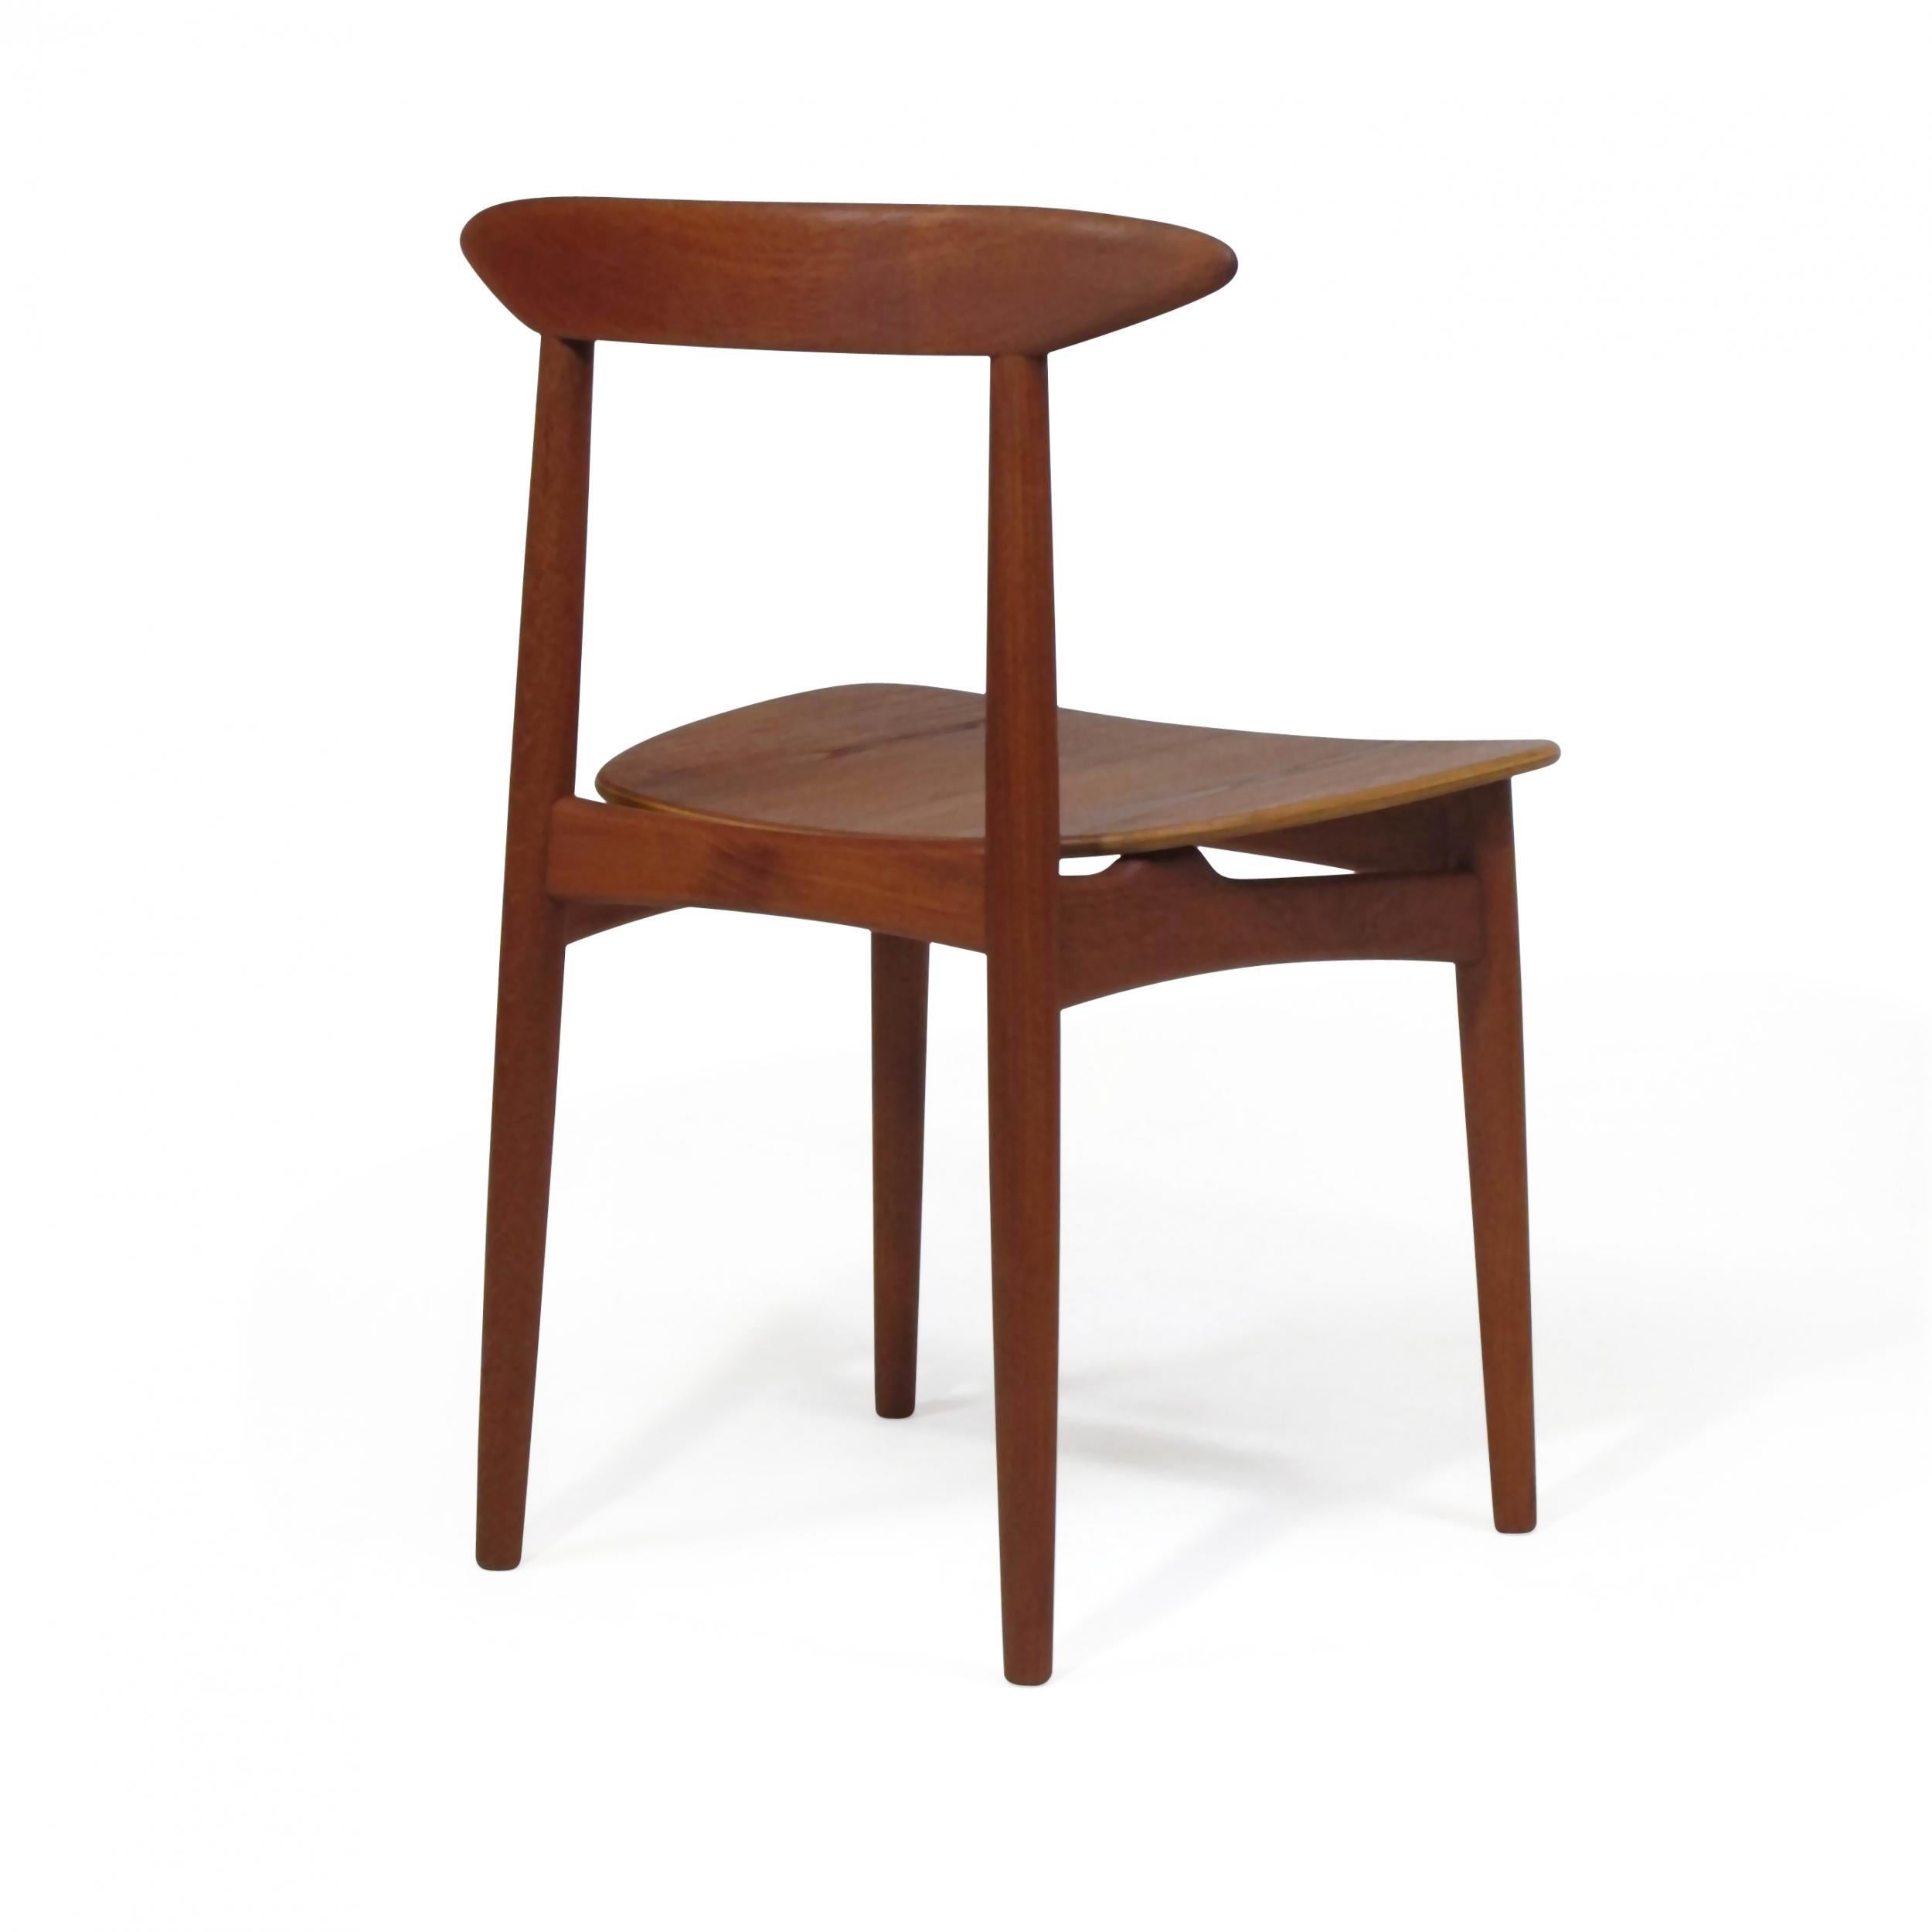 Danish Teak Dining Chairs with Wooden Seats For Sale 1